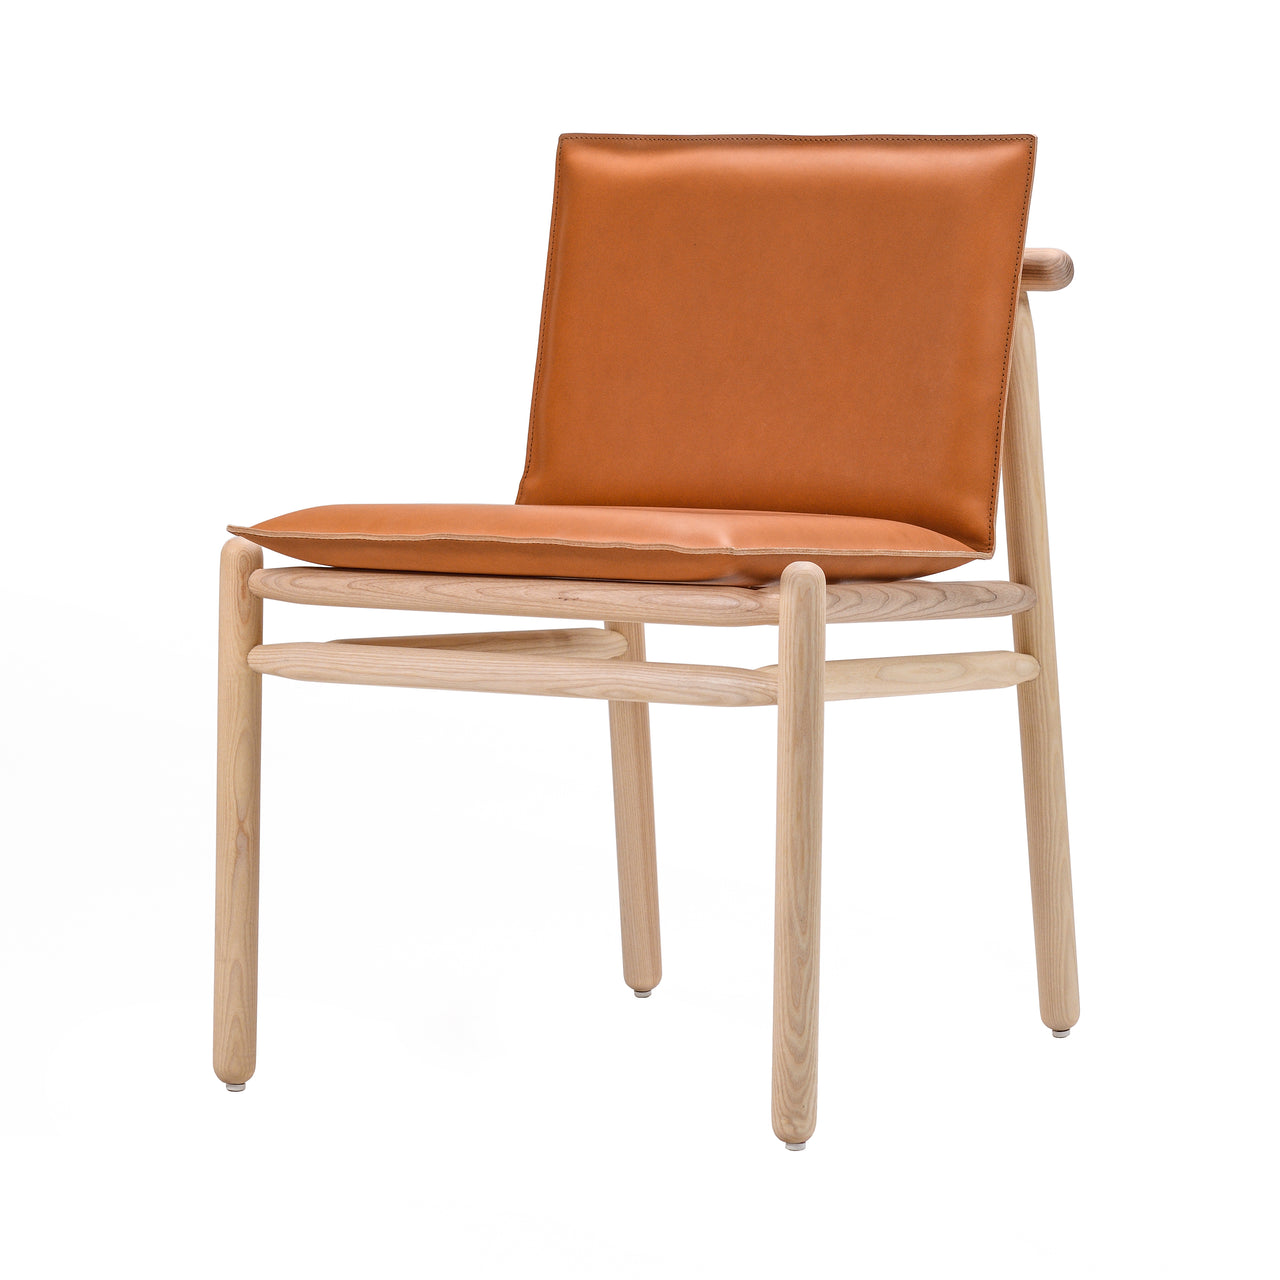 Igman Chair: Without Armrest + White Oiled Oak + Cognac Saddle Leather